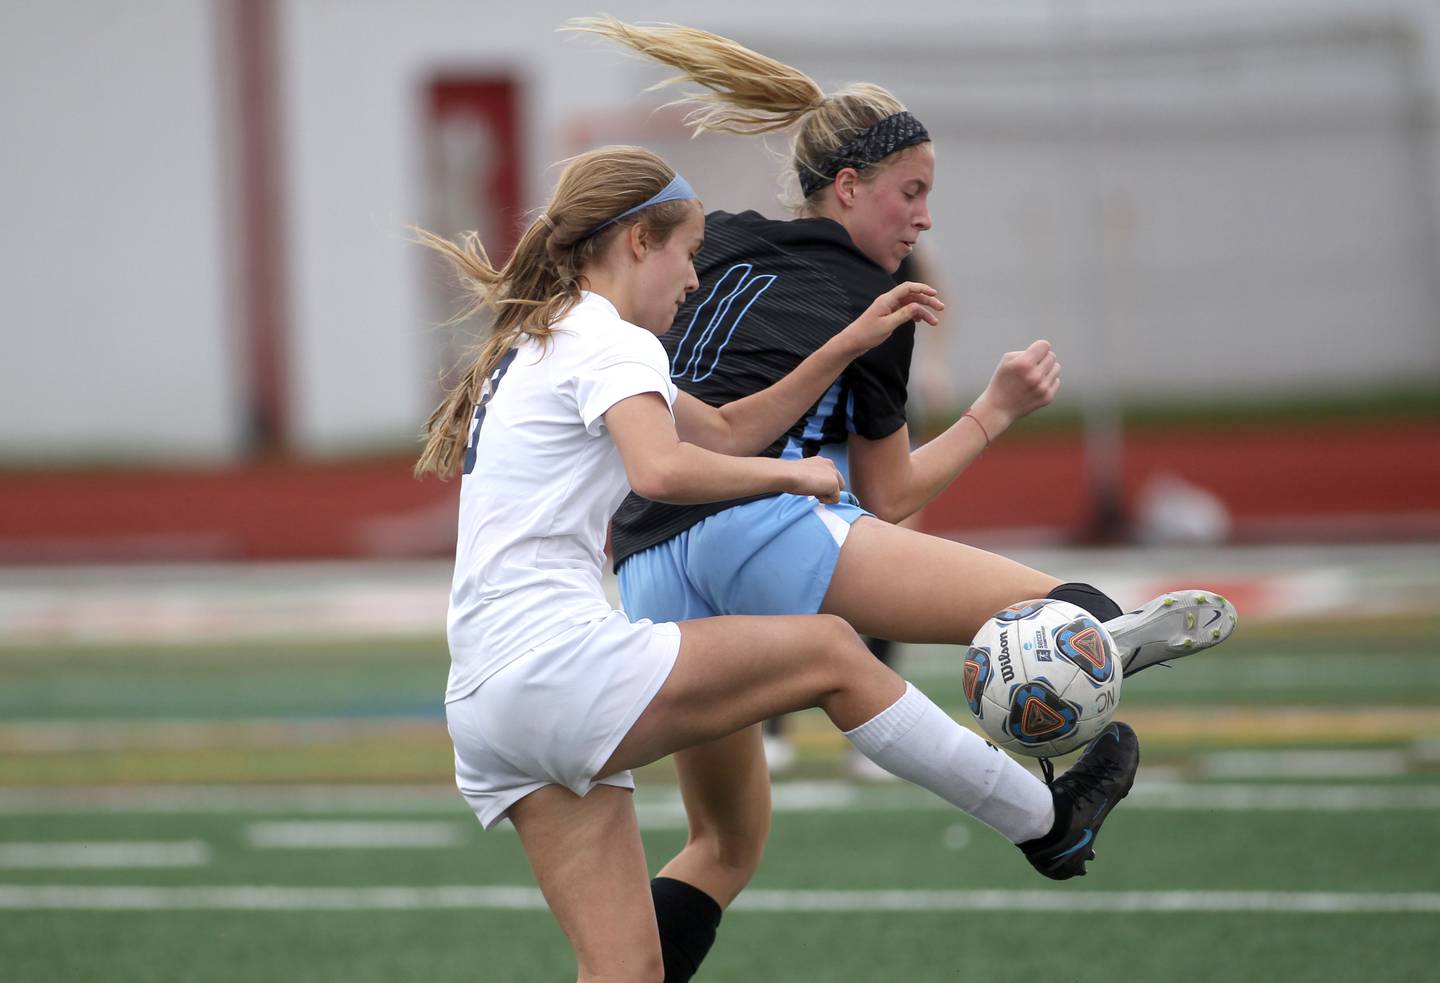 Oswego East’s Anya Gulbrandsen (3) and St. Charles North’s Sidney Timms go after the ball during a Naperville Invitational game at Naperville Central on Saturday, April 23, 2022.